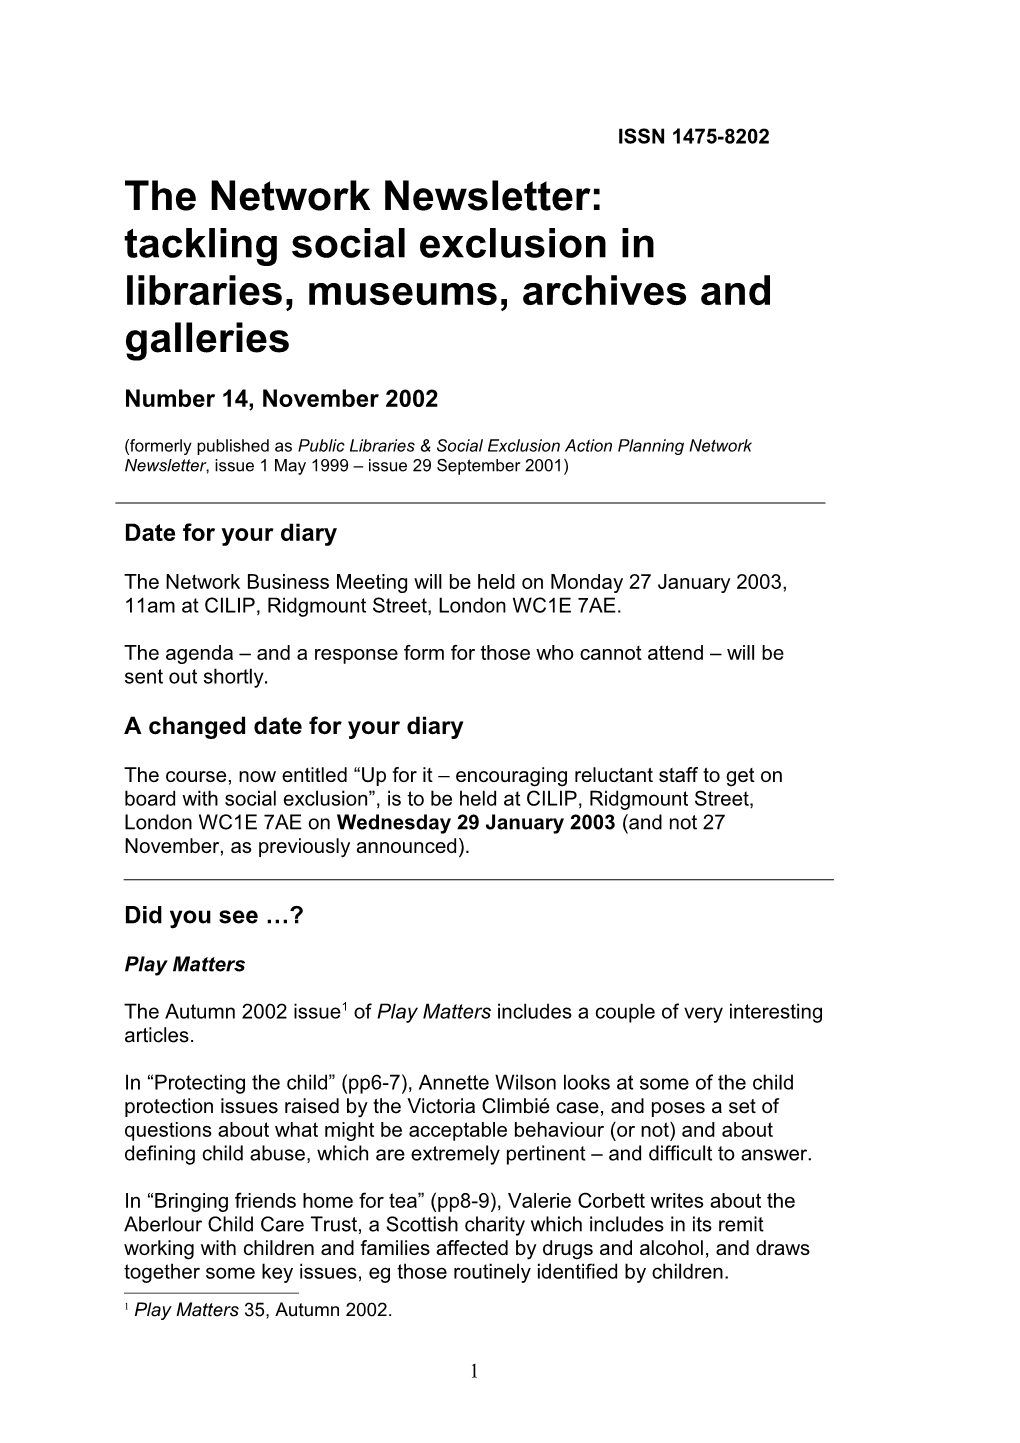 Tackling Social Exclusion in Libraries, Museums, Archives and Galleries